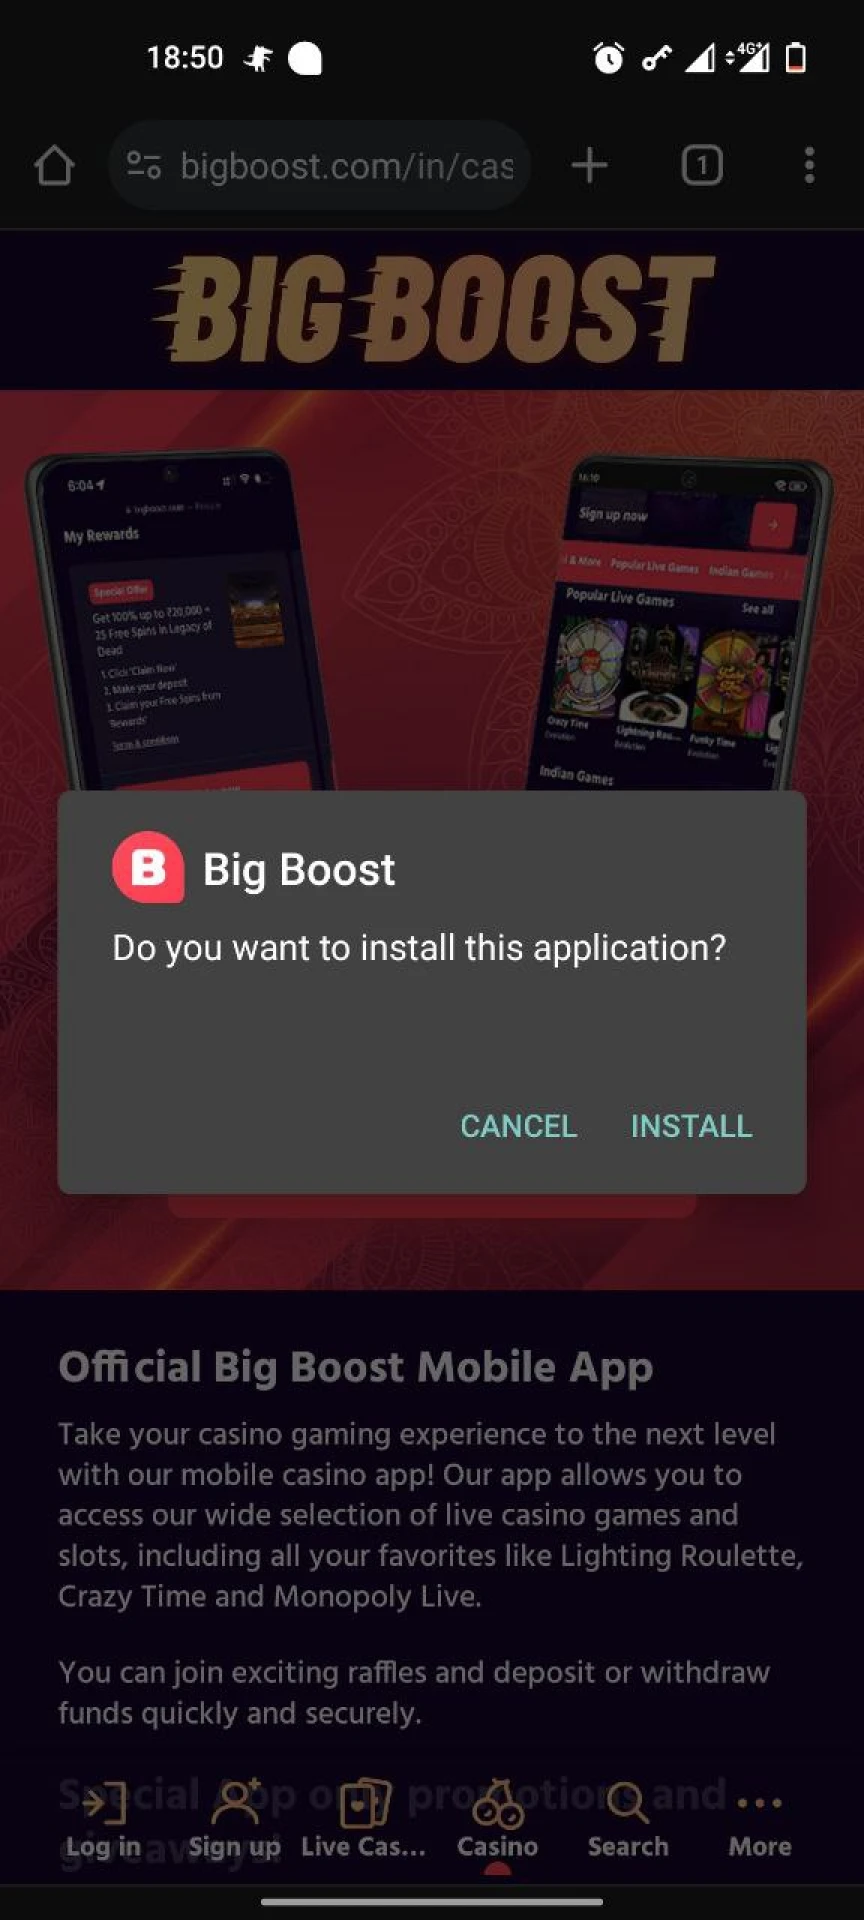 Click the install Big Boost button to install the application.